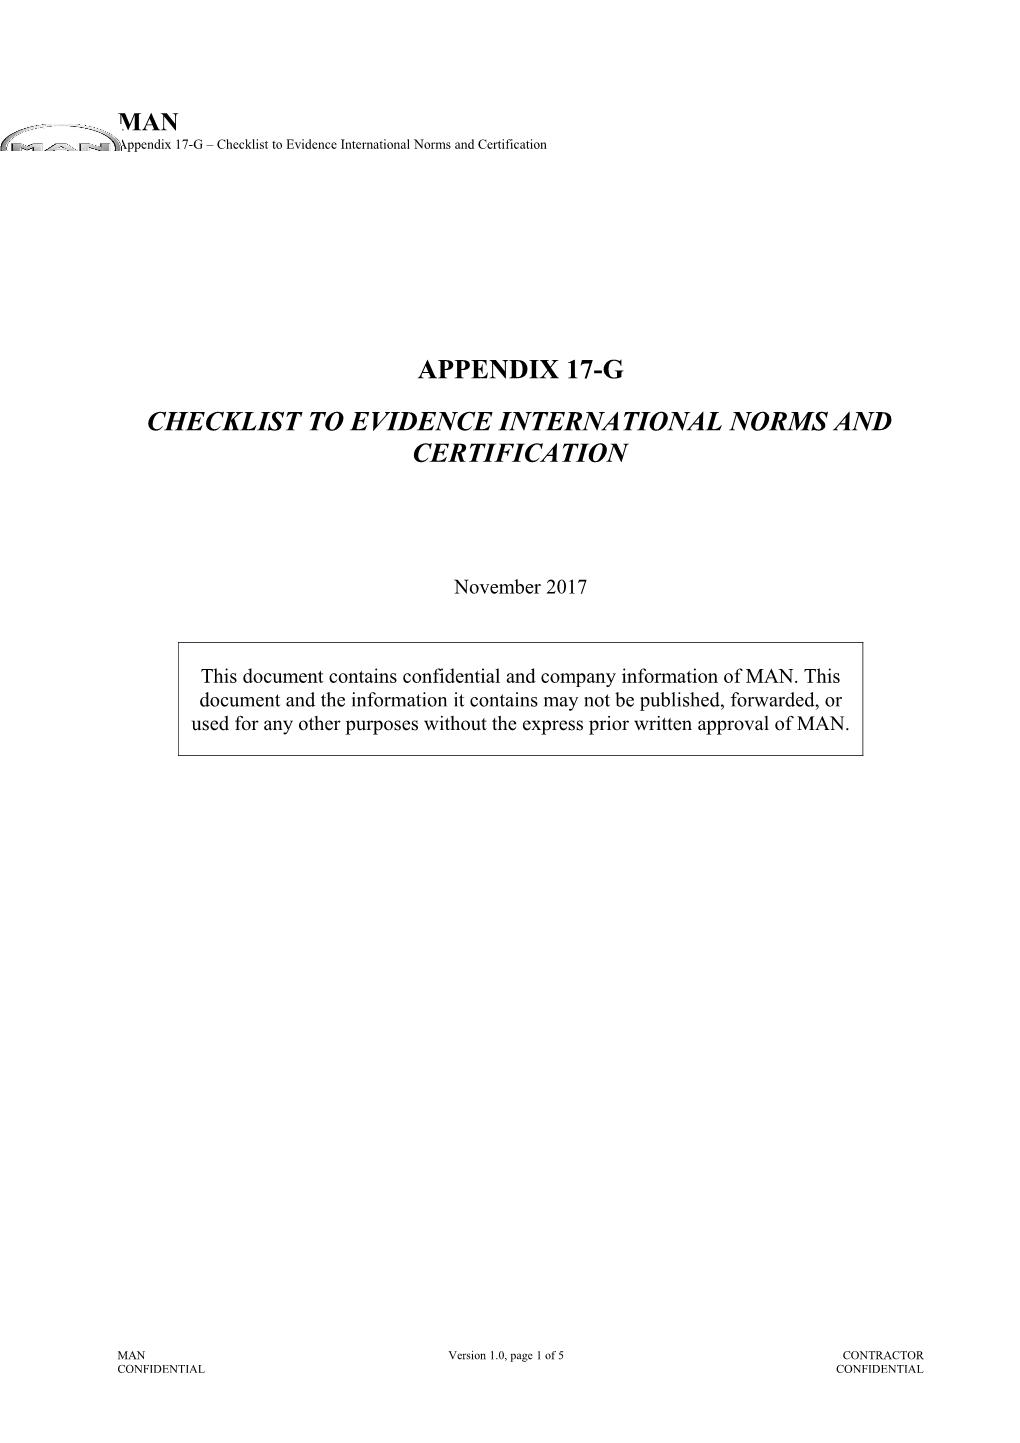 Checklist to Evidence International Norms and Certification